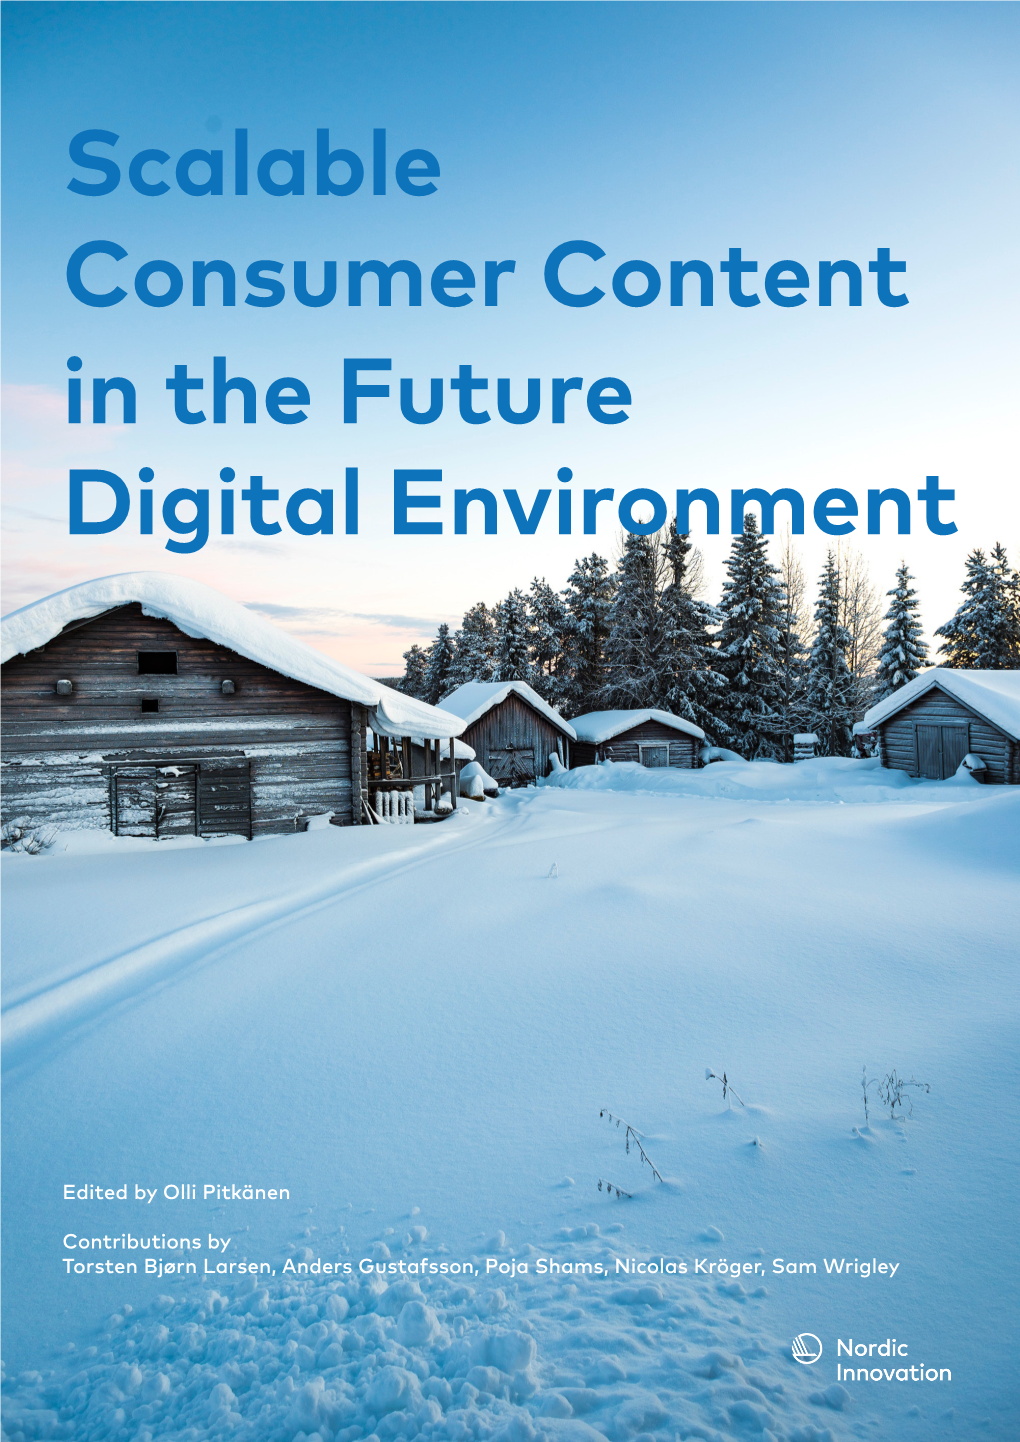 Scalable Consumer Content in the Future Digital Environment